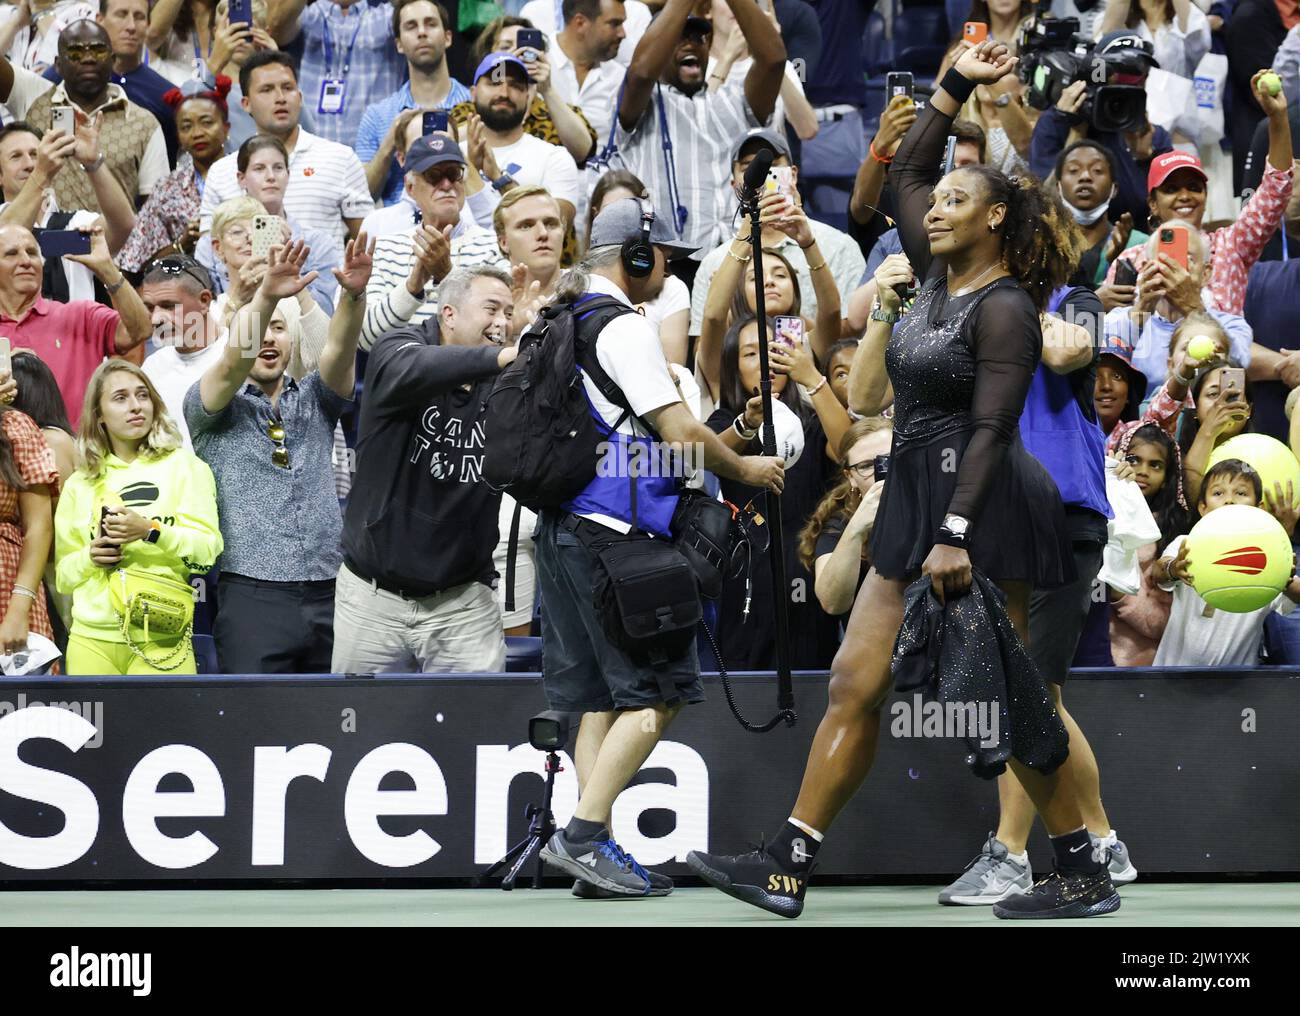 Flushing Meadow, USA. 02nd Sep, 2022. Serena Williams walks off of the court for possibly the last time ever after losing to Ajla Tomljanovic of Australia in 3-sets in the third round at the 2022 US Open Tennis Championships in Arthur Ashe Stadium at the USTA Billie Jean King National Tennis Center in New York City, on Thursday, September 2, 2022. Serena announced last month she will be stepping away from tennis to focus on growing her family and other pursuits. Photo by John Angelillo/UPI Credit: UPI/Alamy Live News Stock Photo